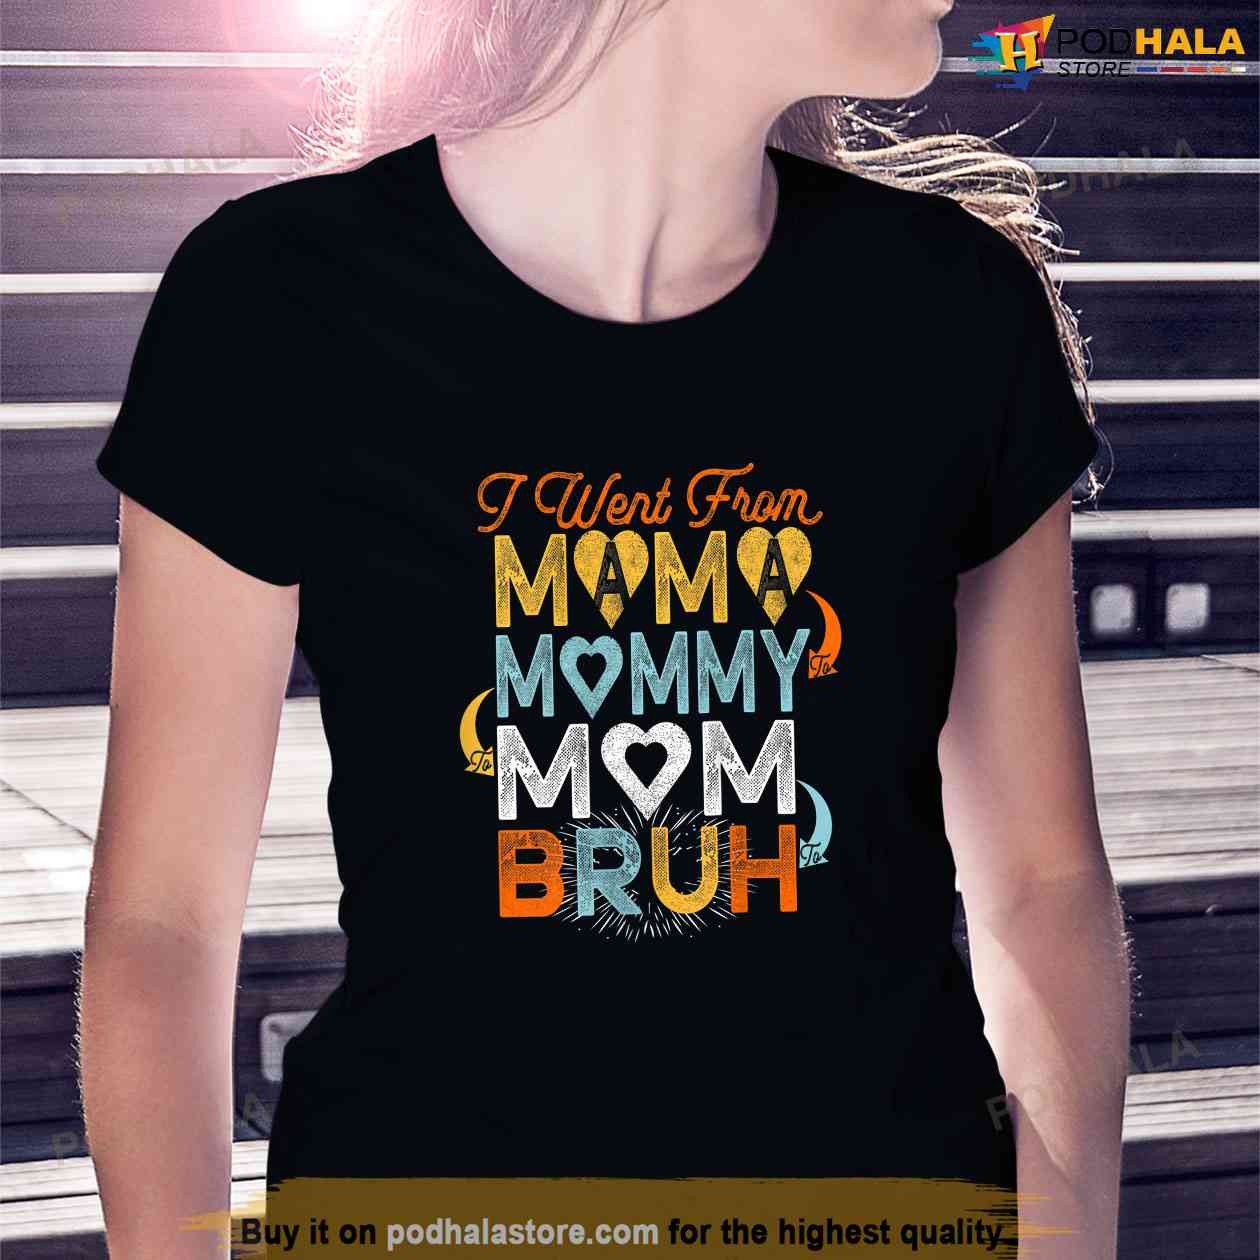 Funny Basketball Mom Gift for Mothers' Women's T-Shirt